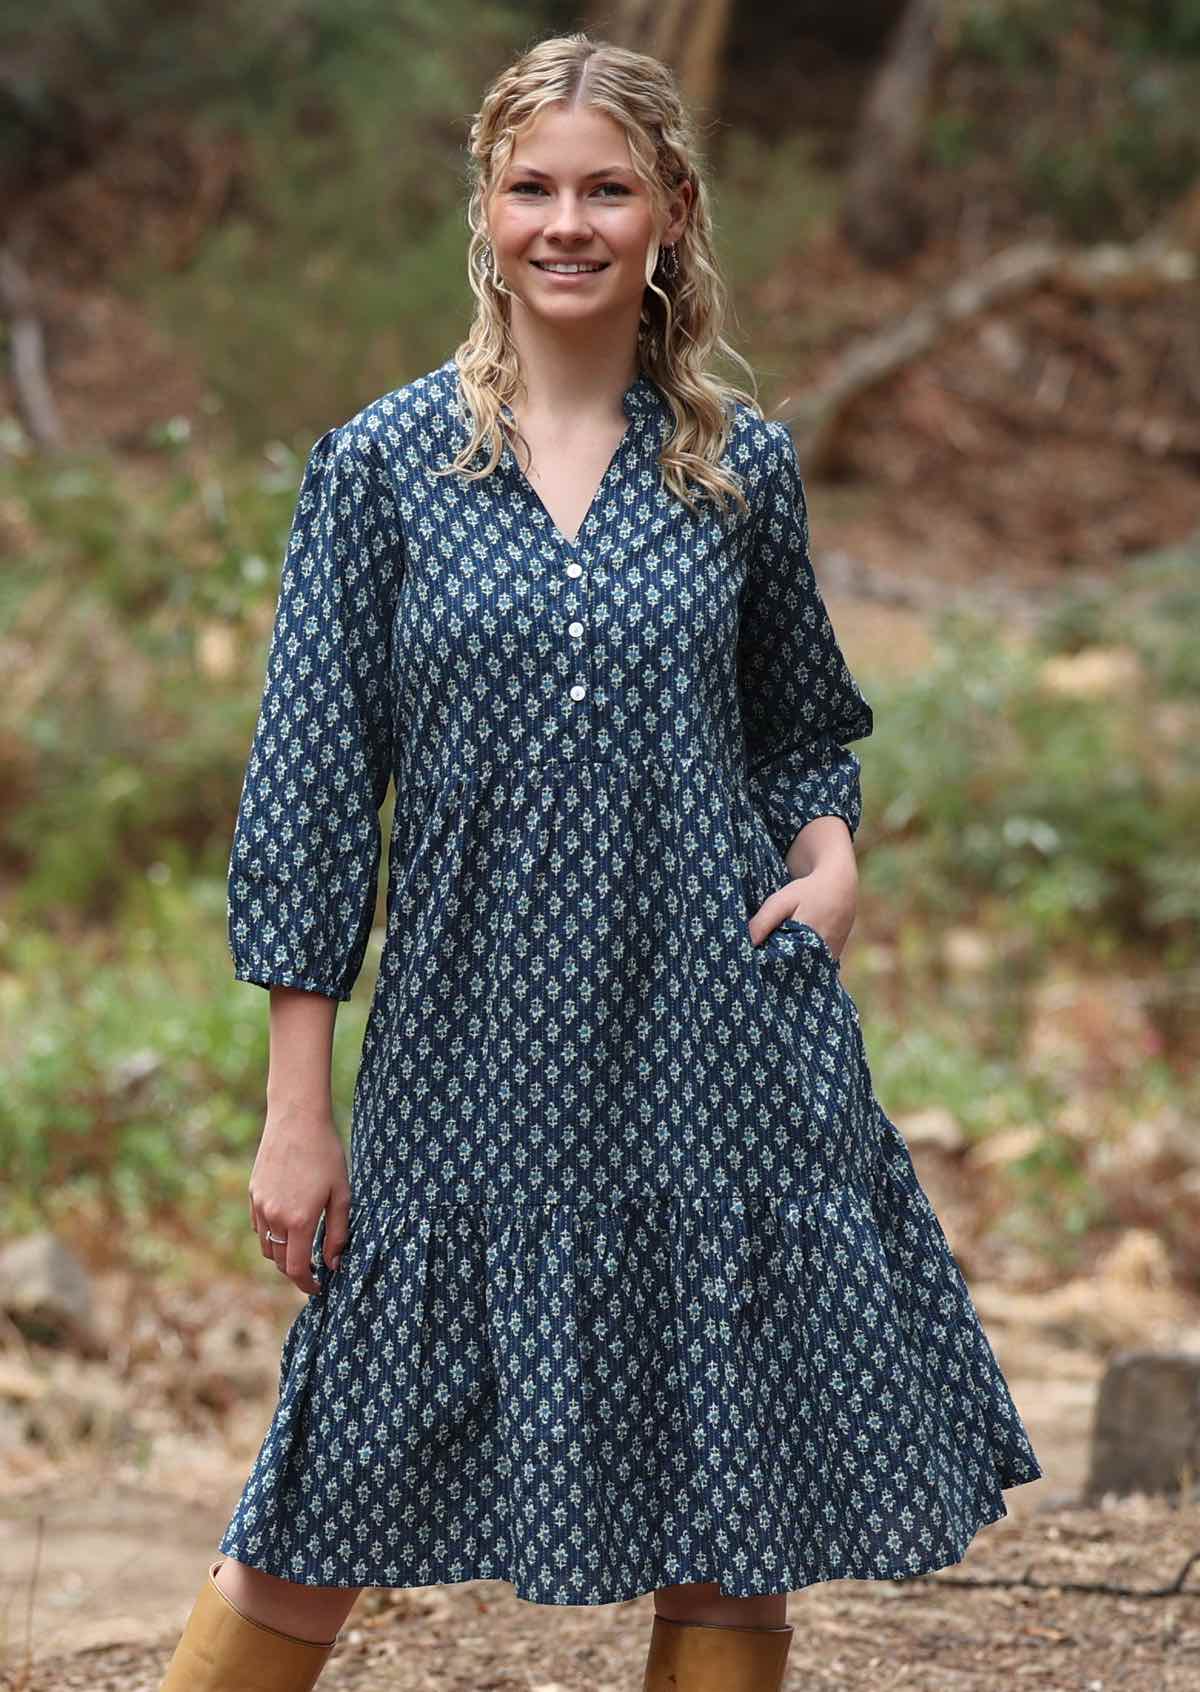 Midi length cotton dress with 3/4 sleeves and side pockets in blue base floral print